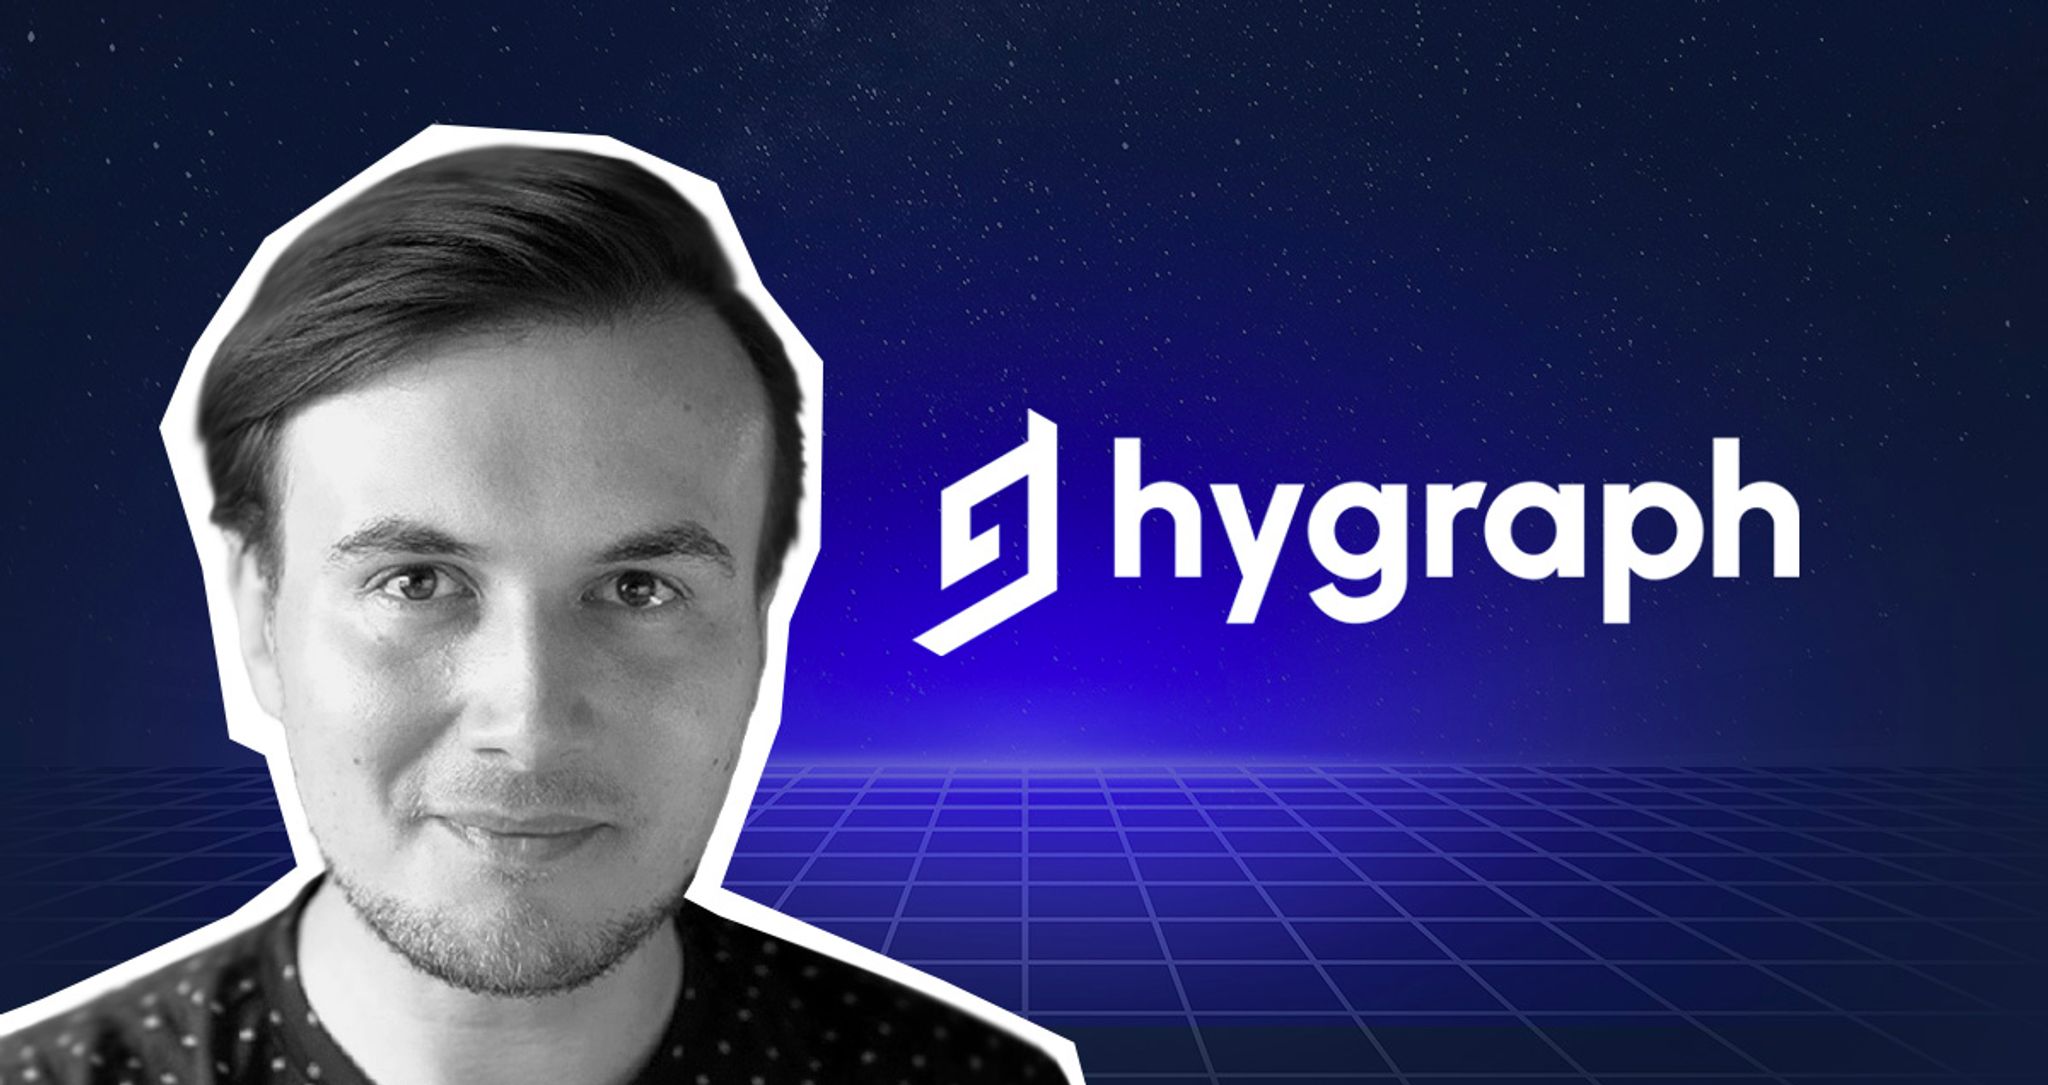 Headshot of Michael with Hygraph logo against space themed background